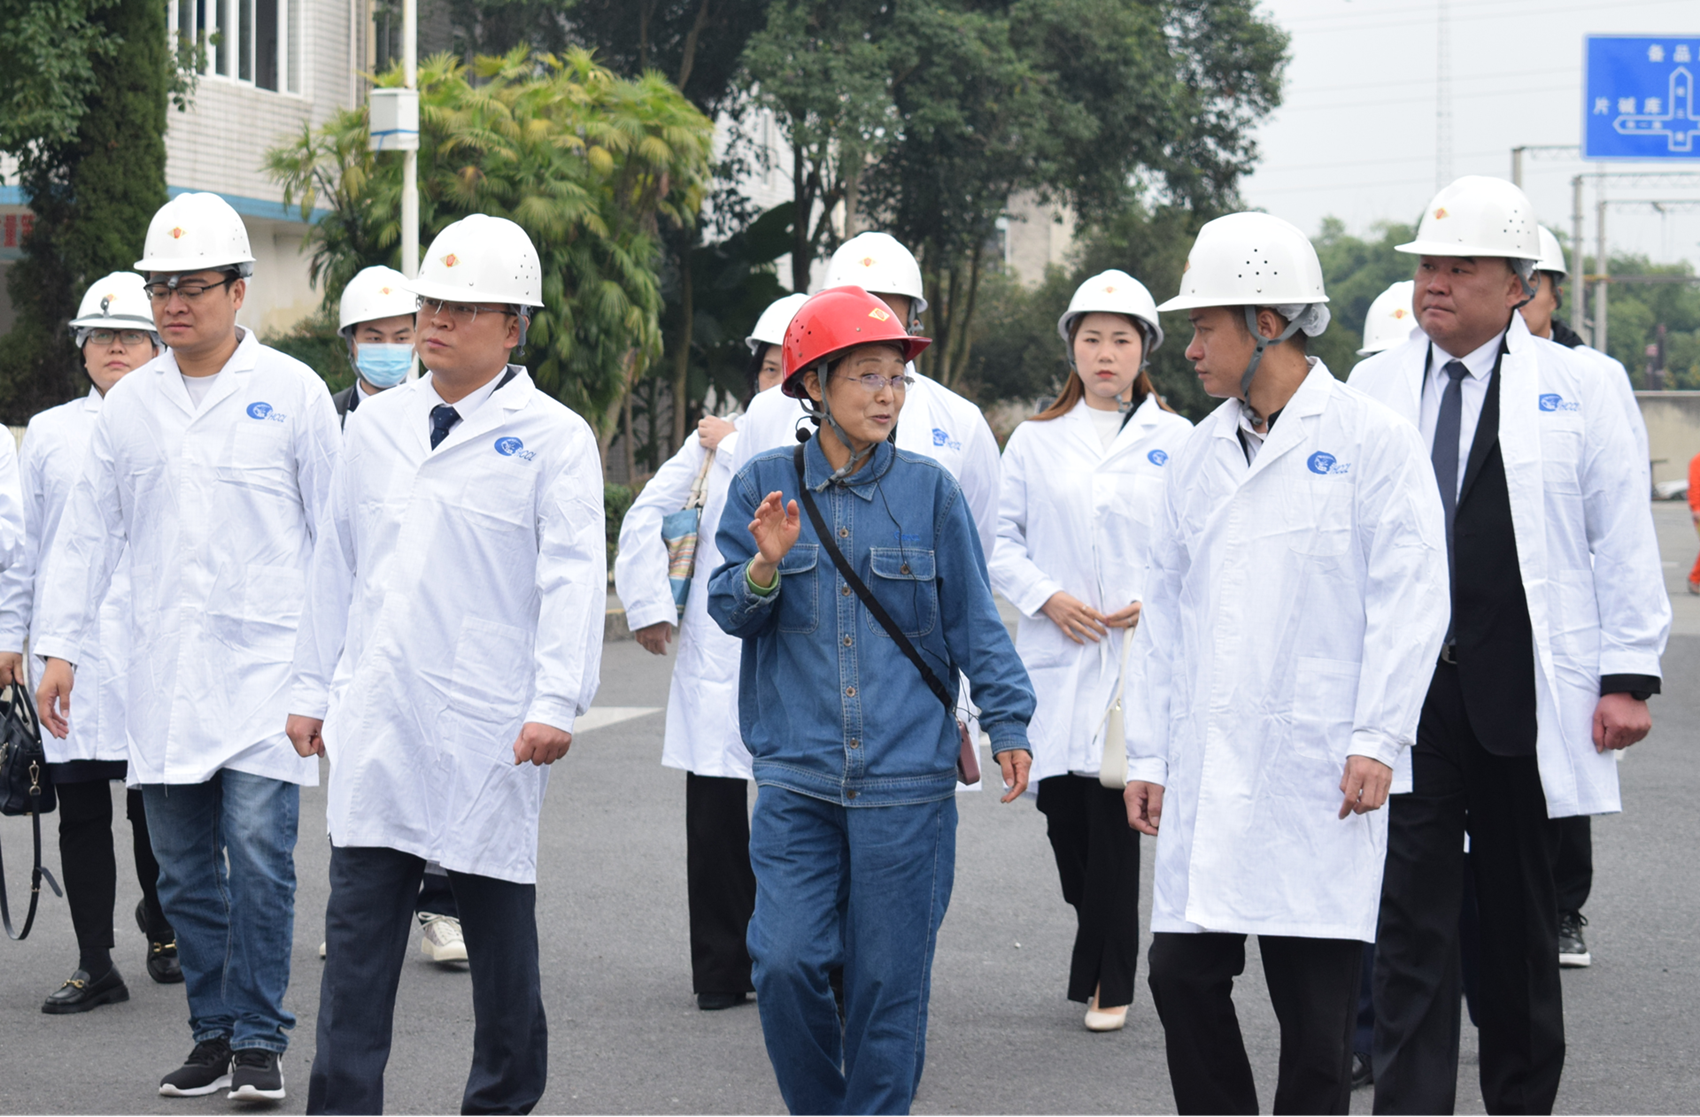 Dr. Cheng Yifeng, Vice President of the Group, Led a Delegation to Huarong Chemical for a Visit and Exchange